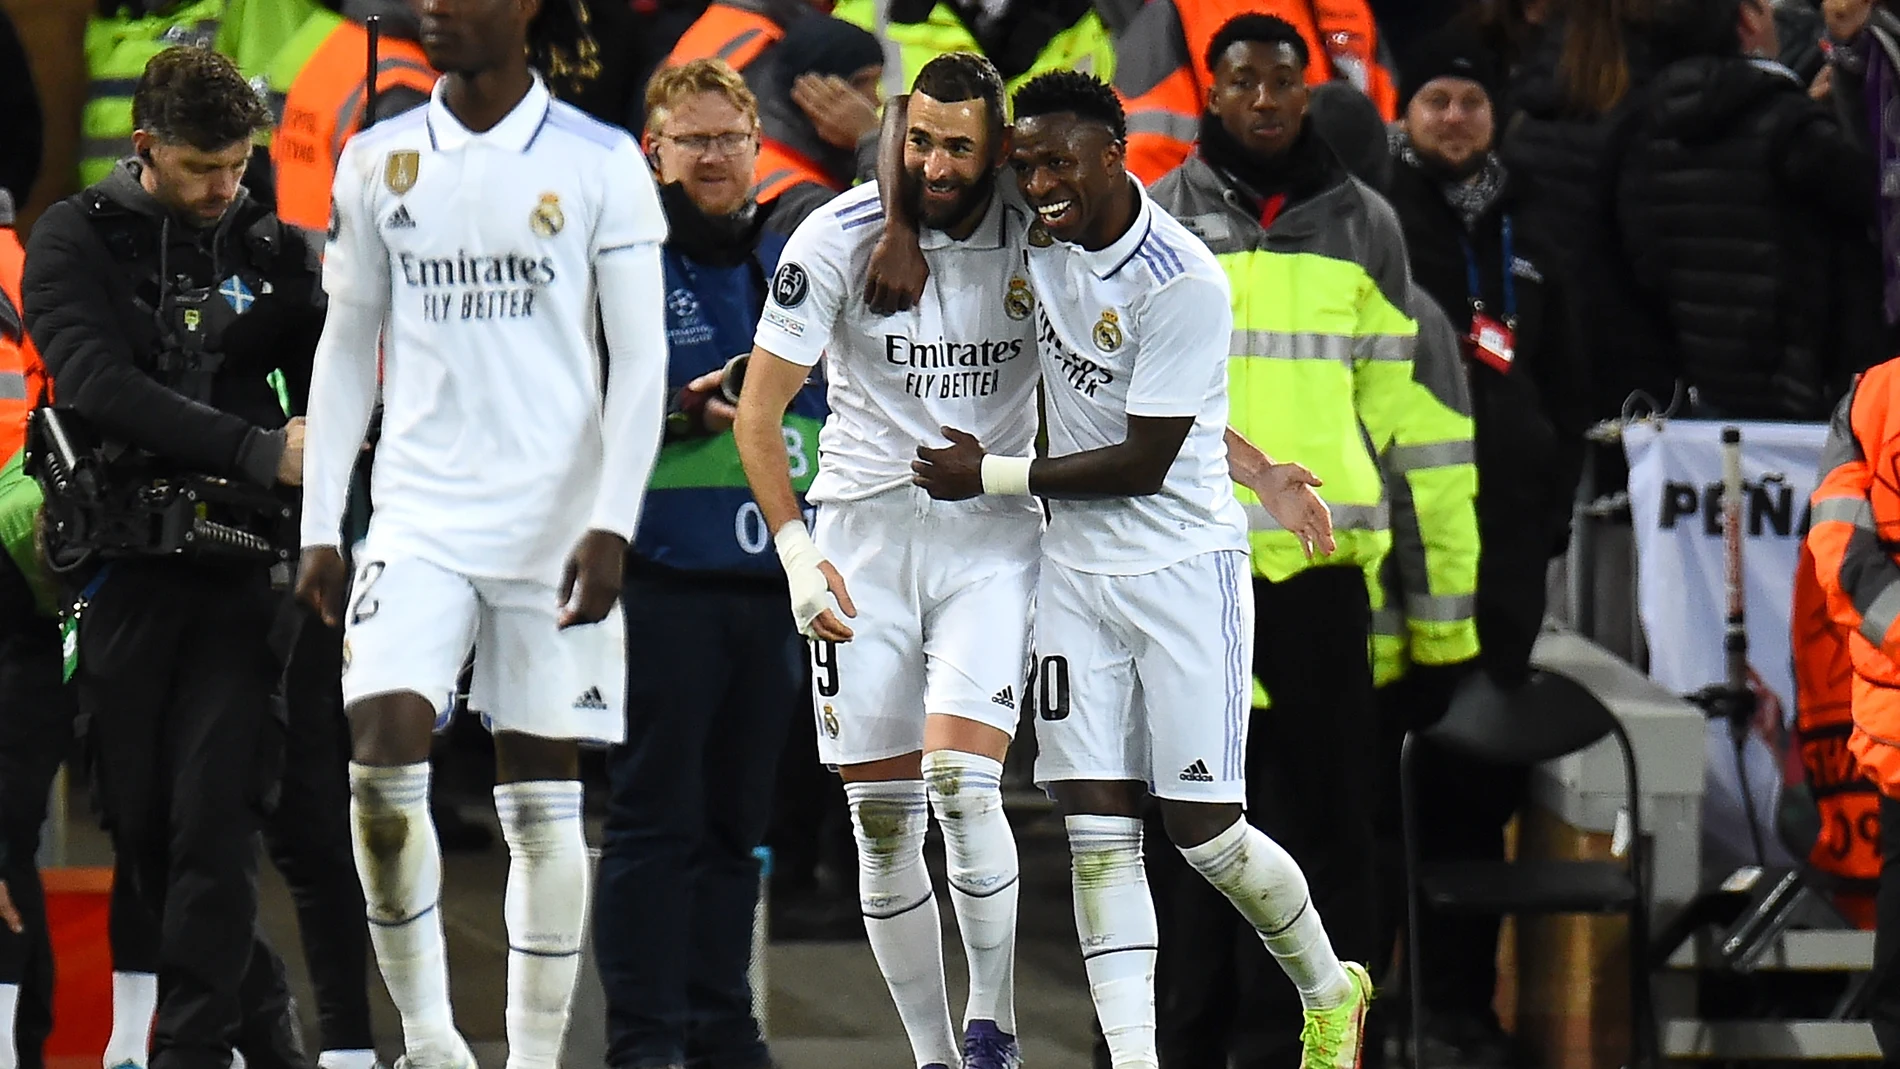 Liverpool (United Kingdom), 21/02/2023.- Karim Benzema (C) of Real Madrid celebrates with teammate Vinicius Junior (R) after scoring their 5th goal during the UEFA Champions League, Round of 16, 1st leg match between Liverpool FC and Real Madrid in Liverpool, Britain, 21 February 2023. (Liga de Campeones, Reino Unido) EFE/EPA/Peter Powell 